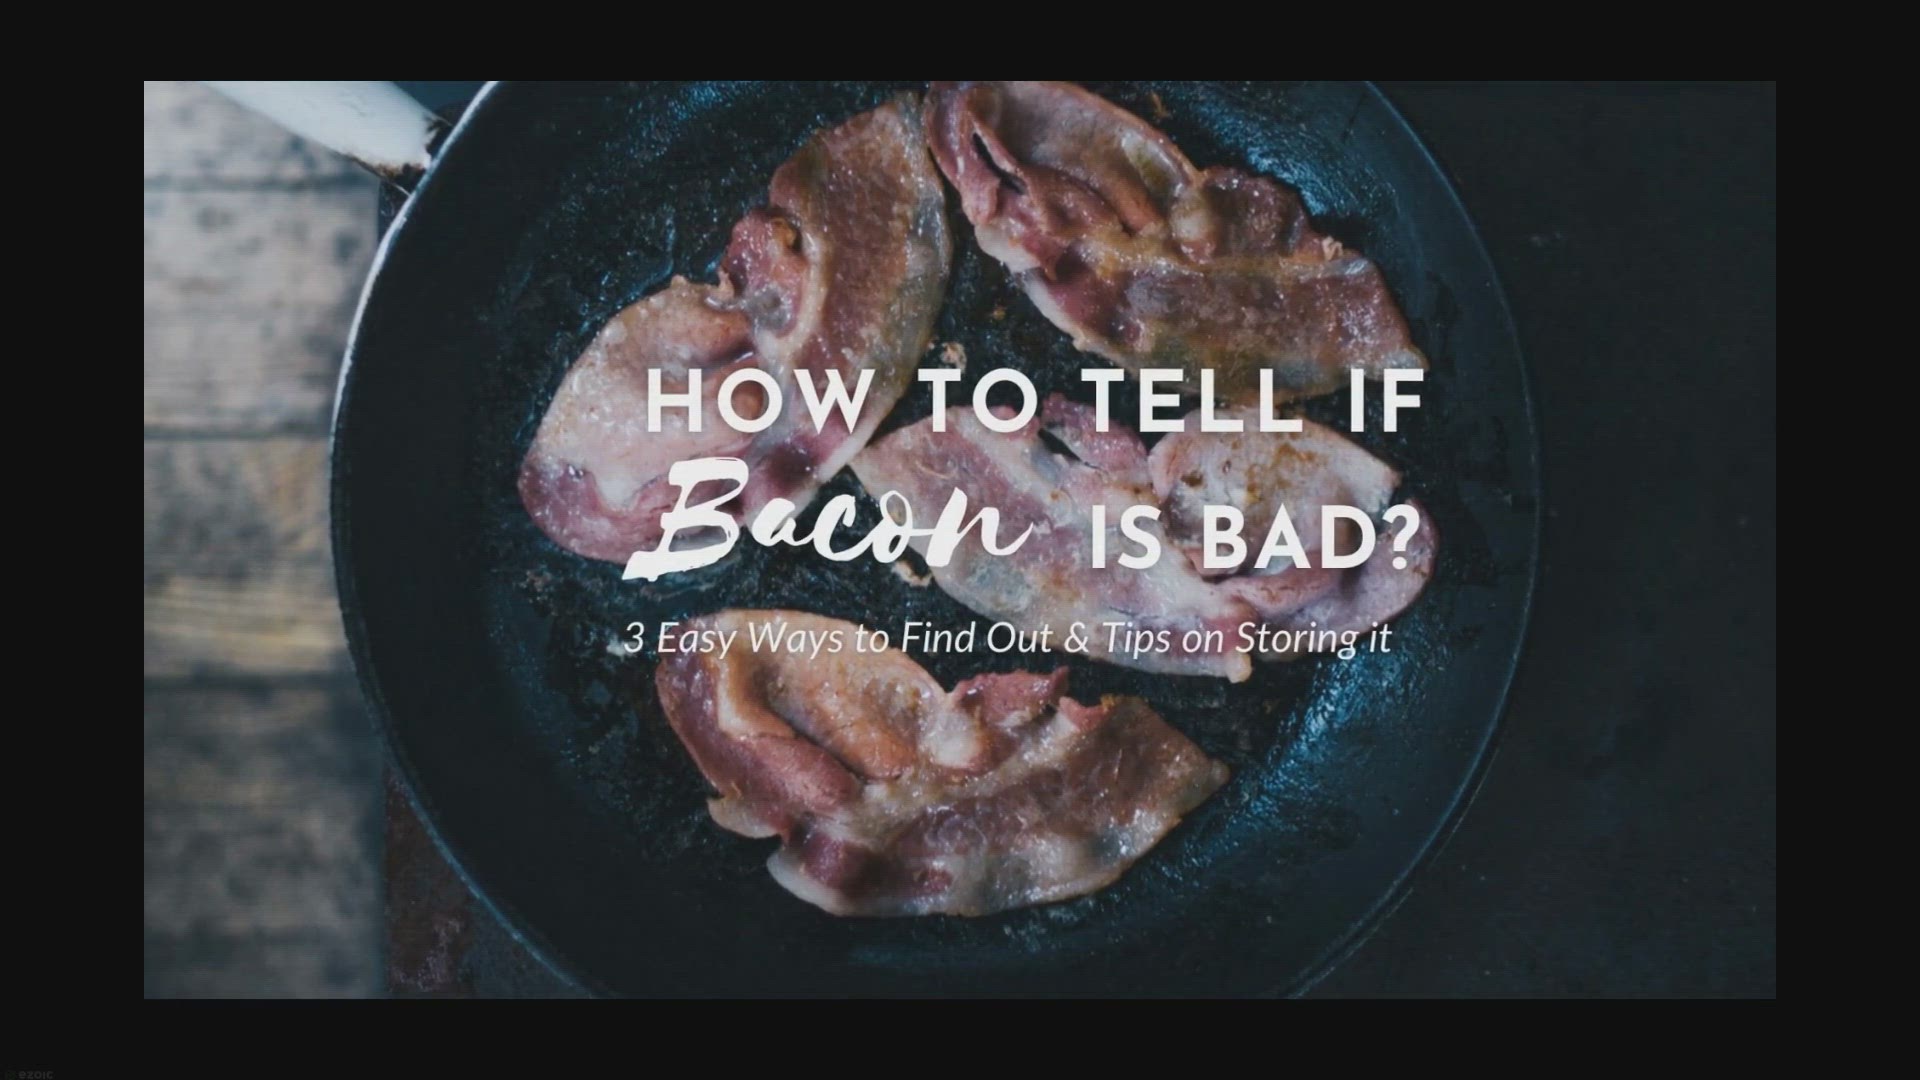 How to Tell If Bacon Is Bad: 3 Easy Ways to Find Out - StreetSmart Kitchen